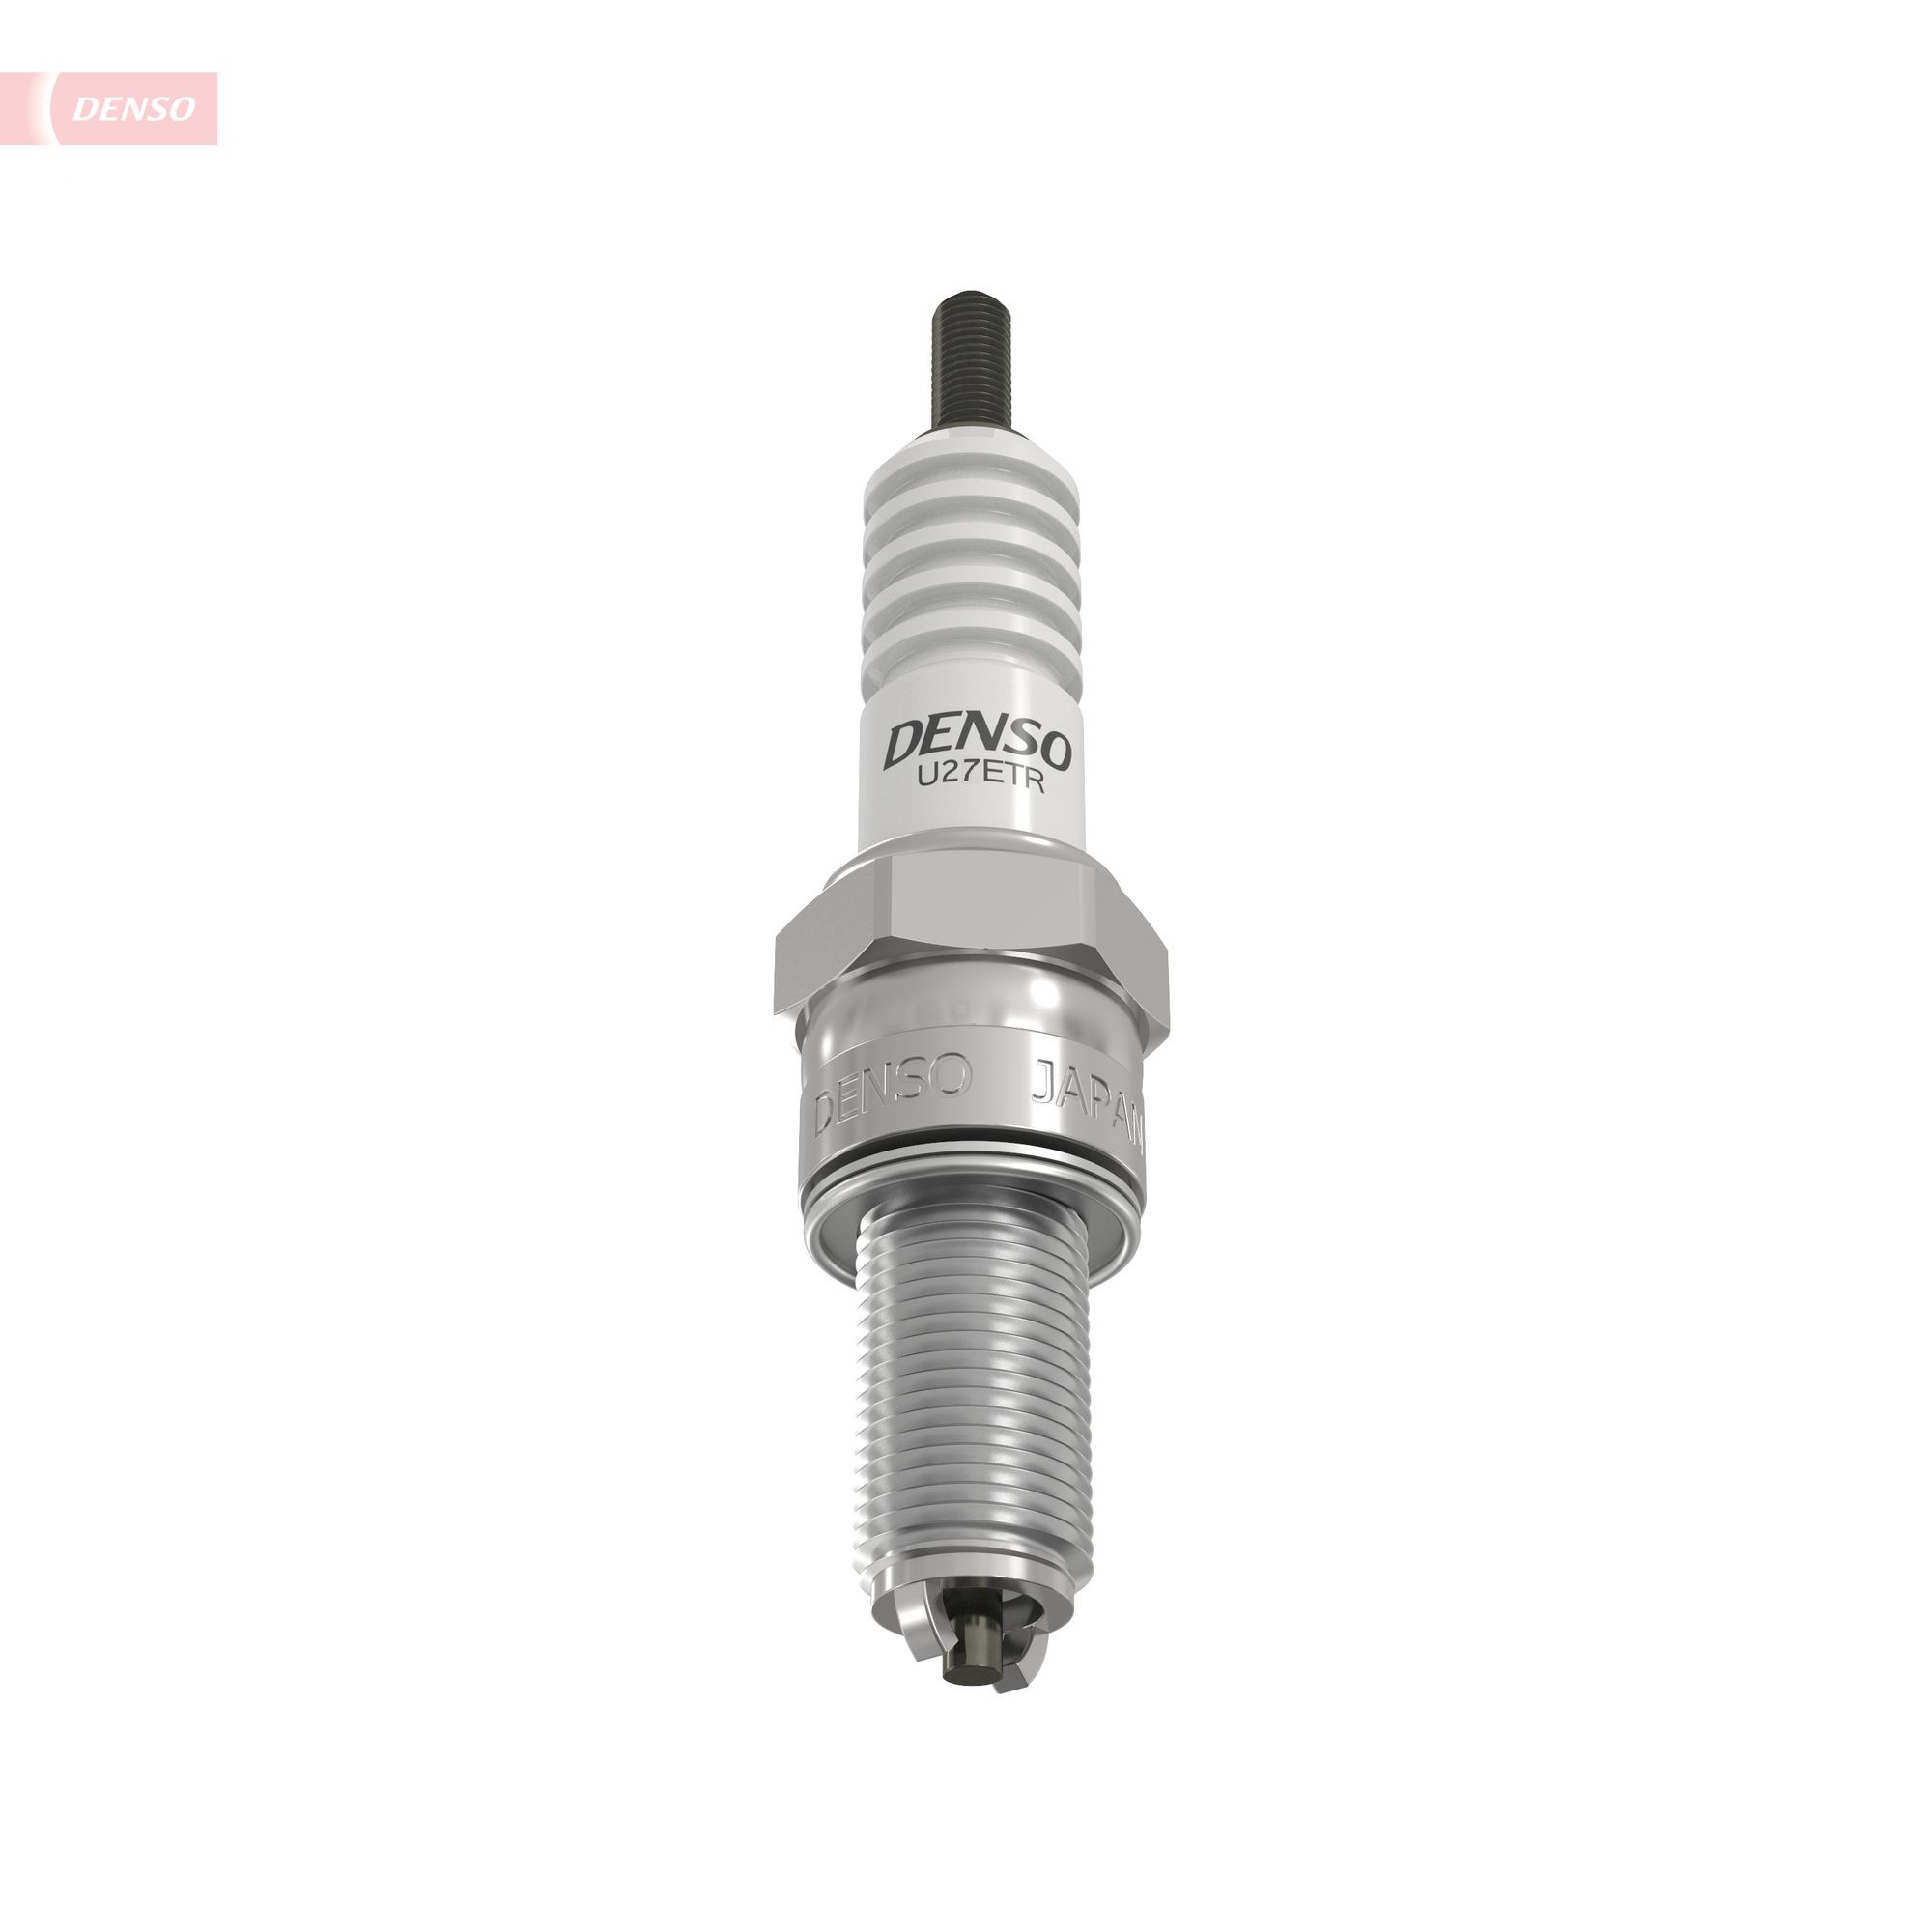 DENSO Spark plugs 4155 buy online